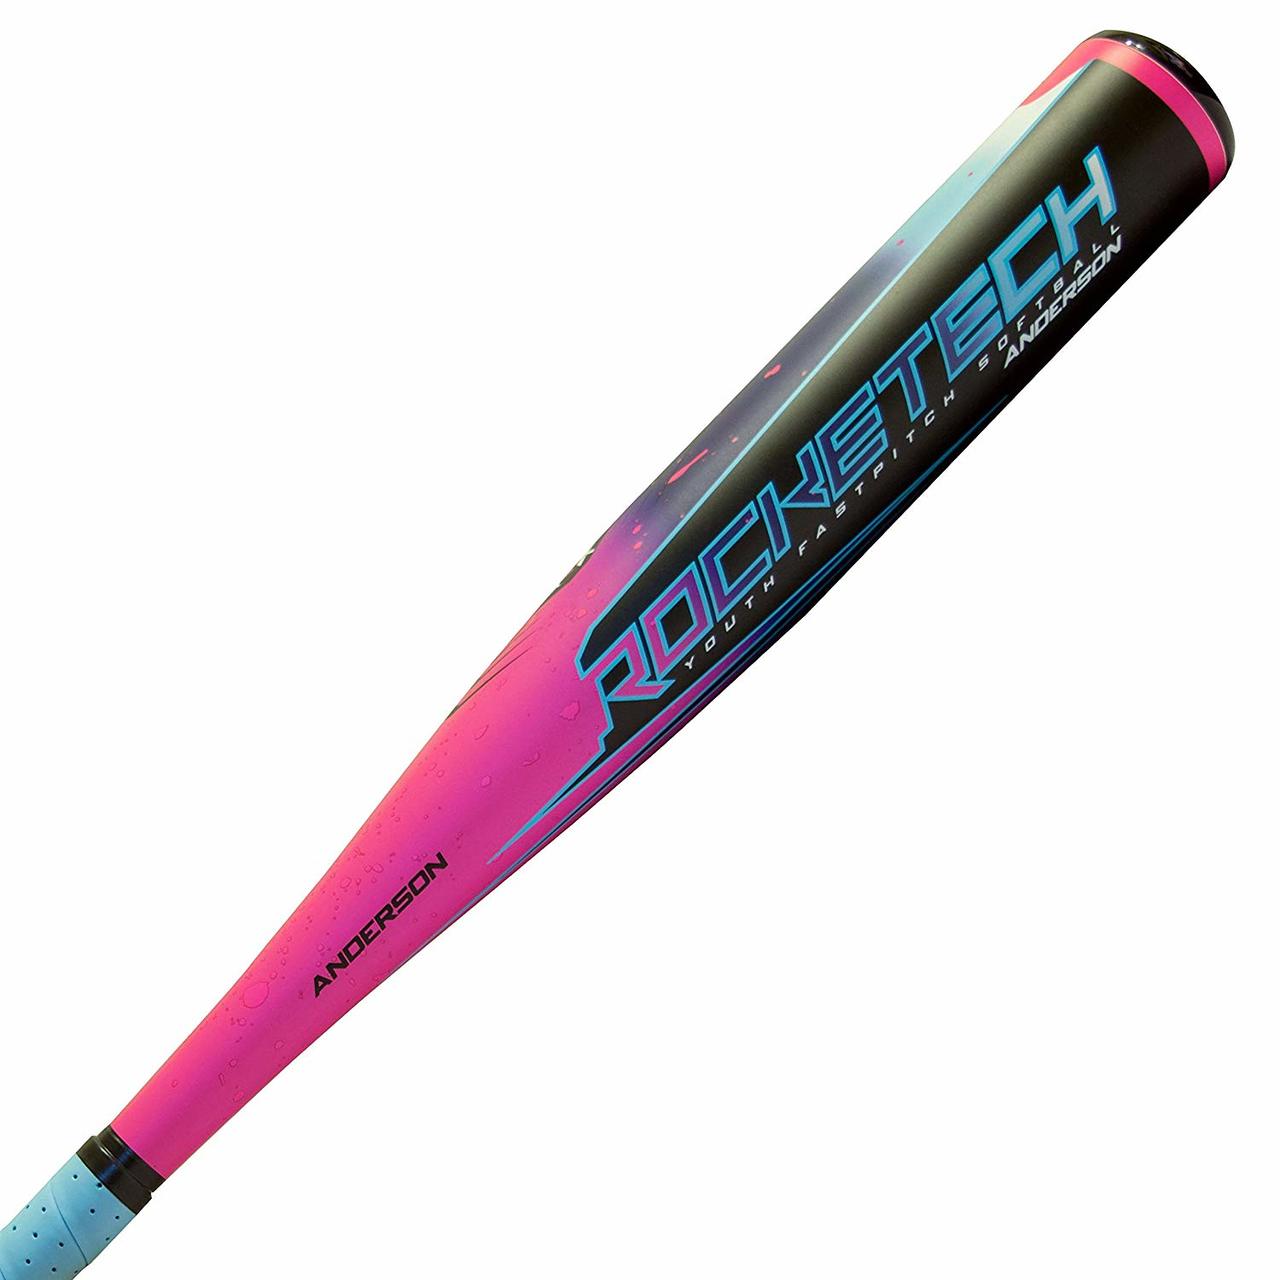 anderson-rocketech-12-youth-fastpitch-softball-bat-29-inch-17-oz 017036-2917 Anderson 874147008508 Ideal for girls ages 7-10 2 ¼” Barrel / -12 Drop